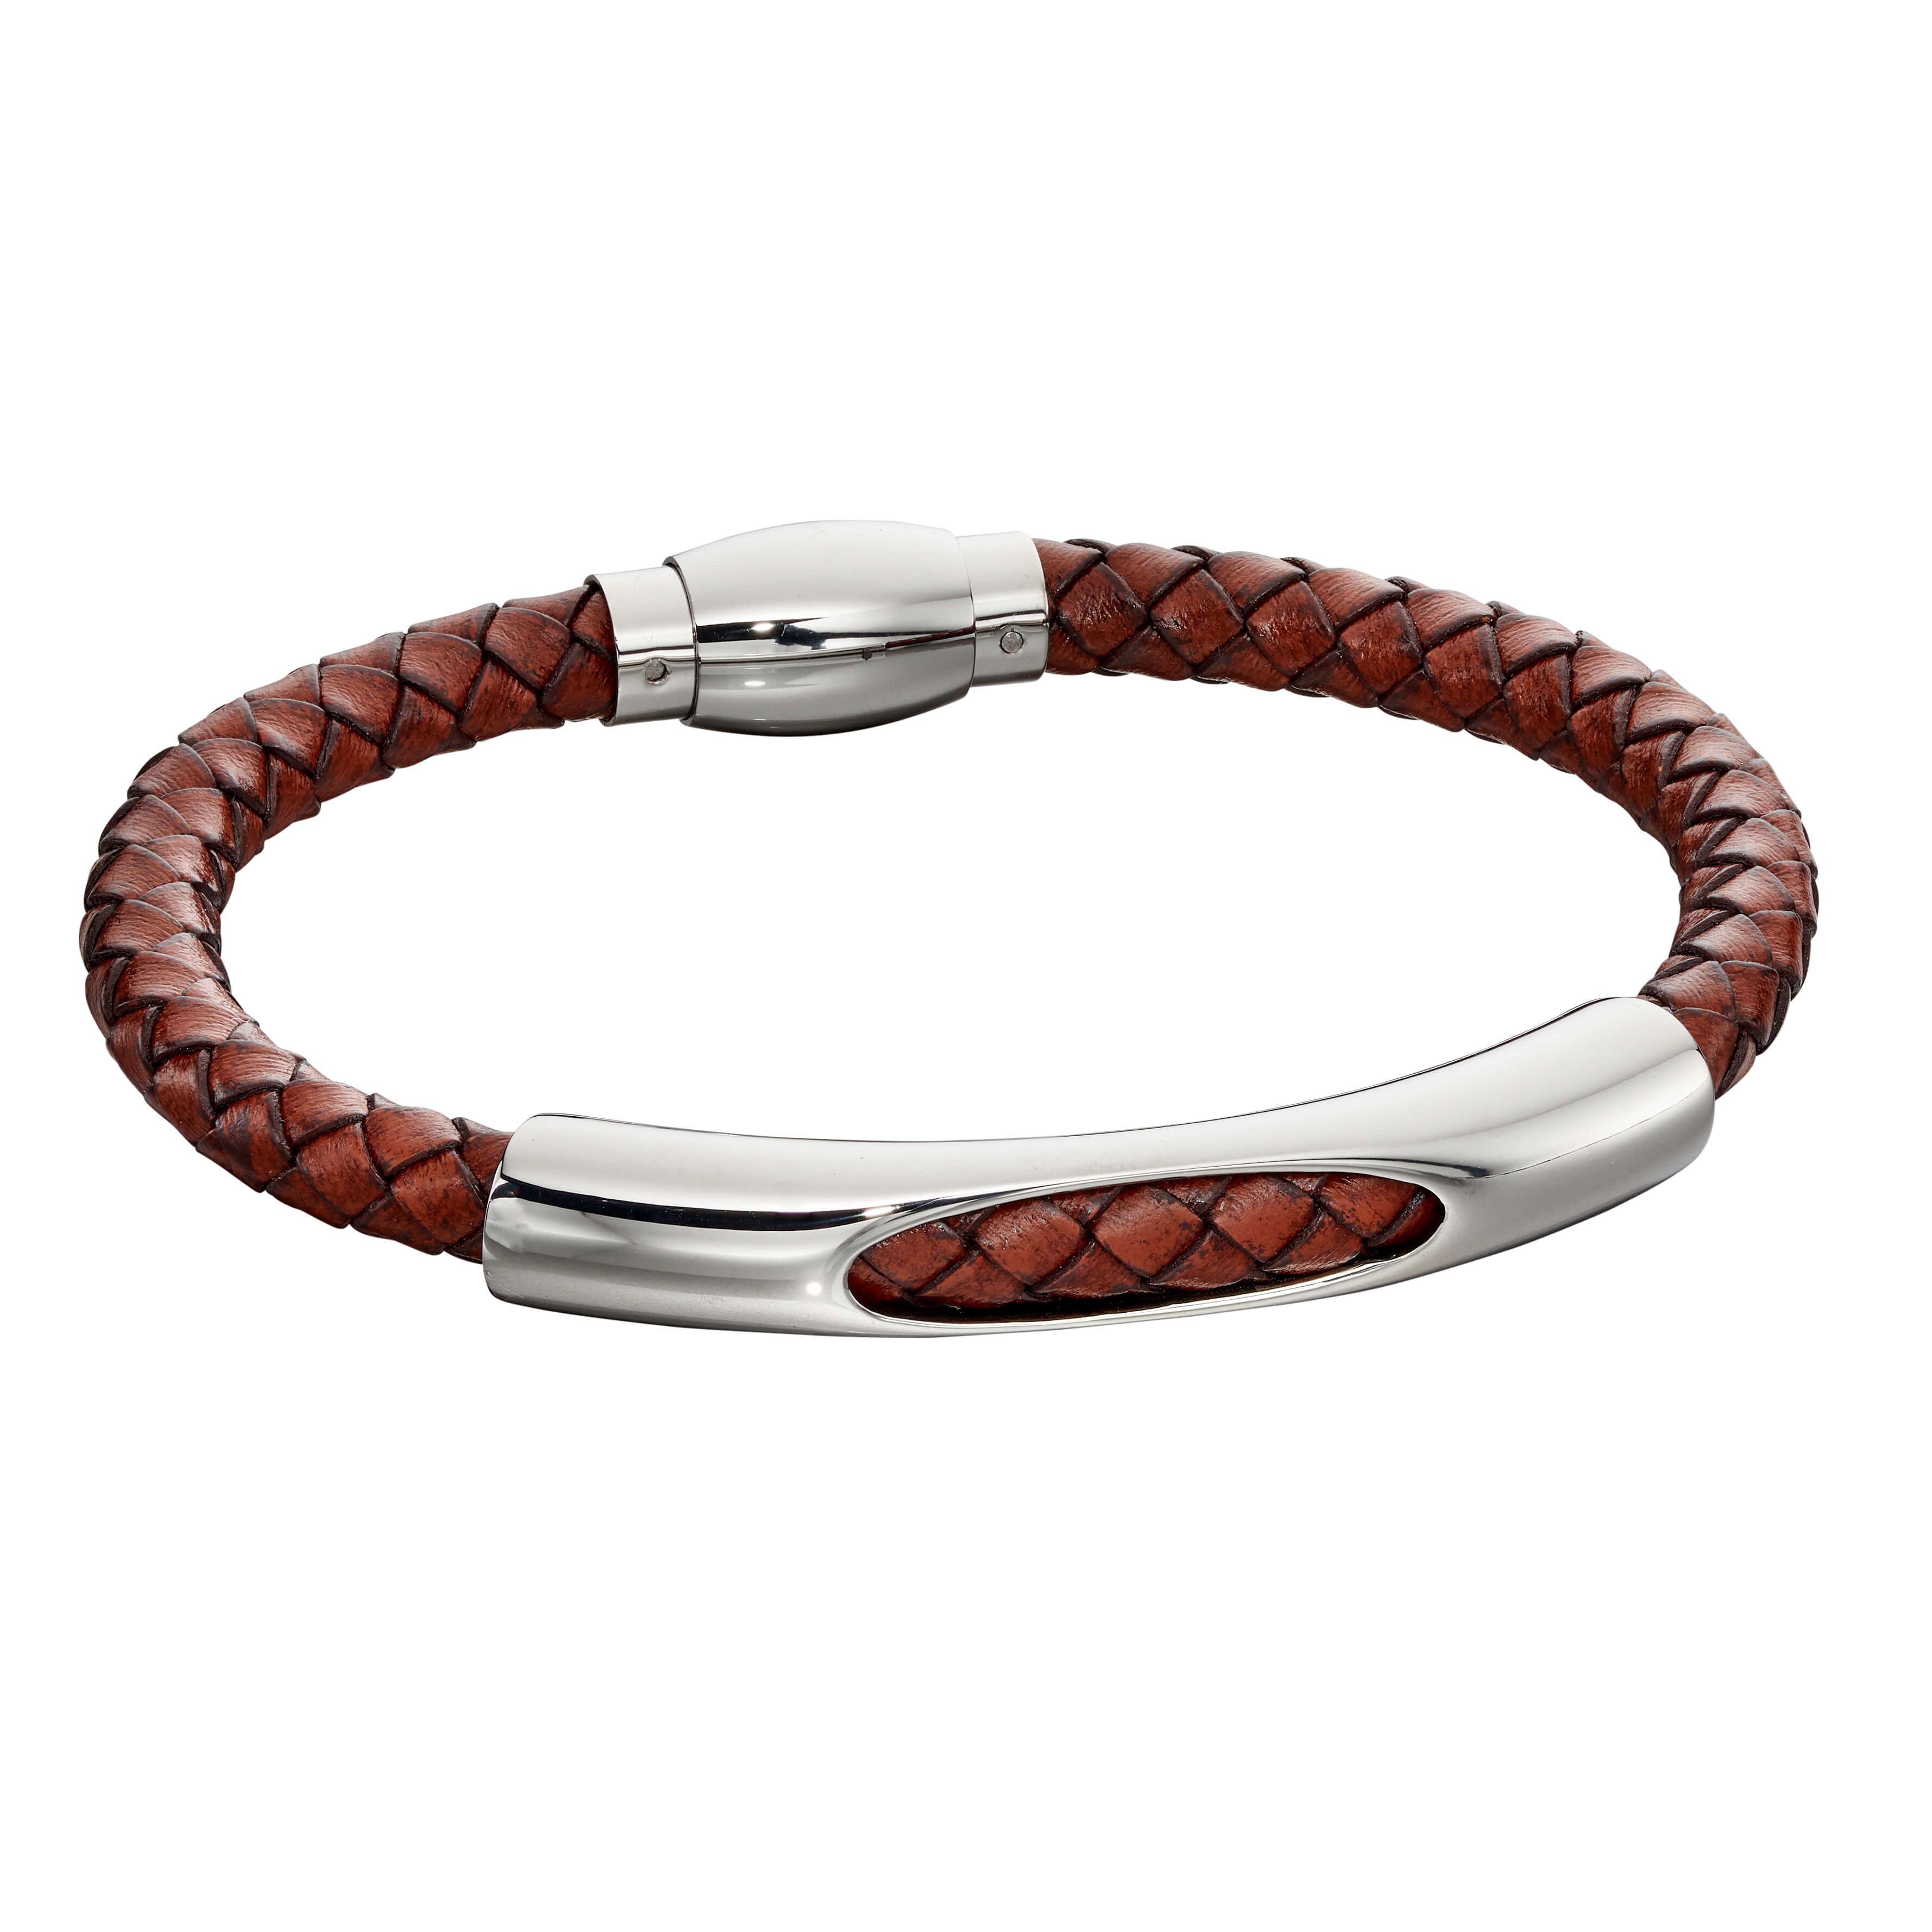 Stainless Steel & Brown Woven Leather Bracelet - FB0005 - Hallmark Jewellers Formby & The Jewellers Bench Widnes